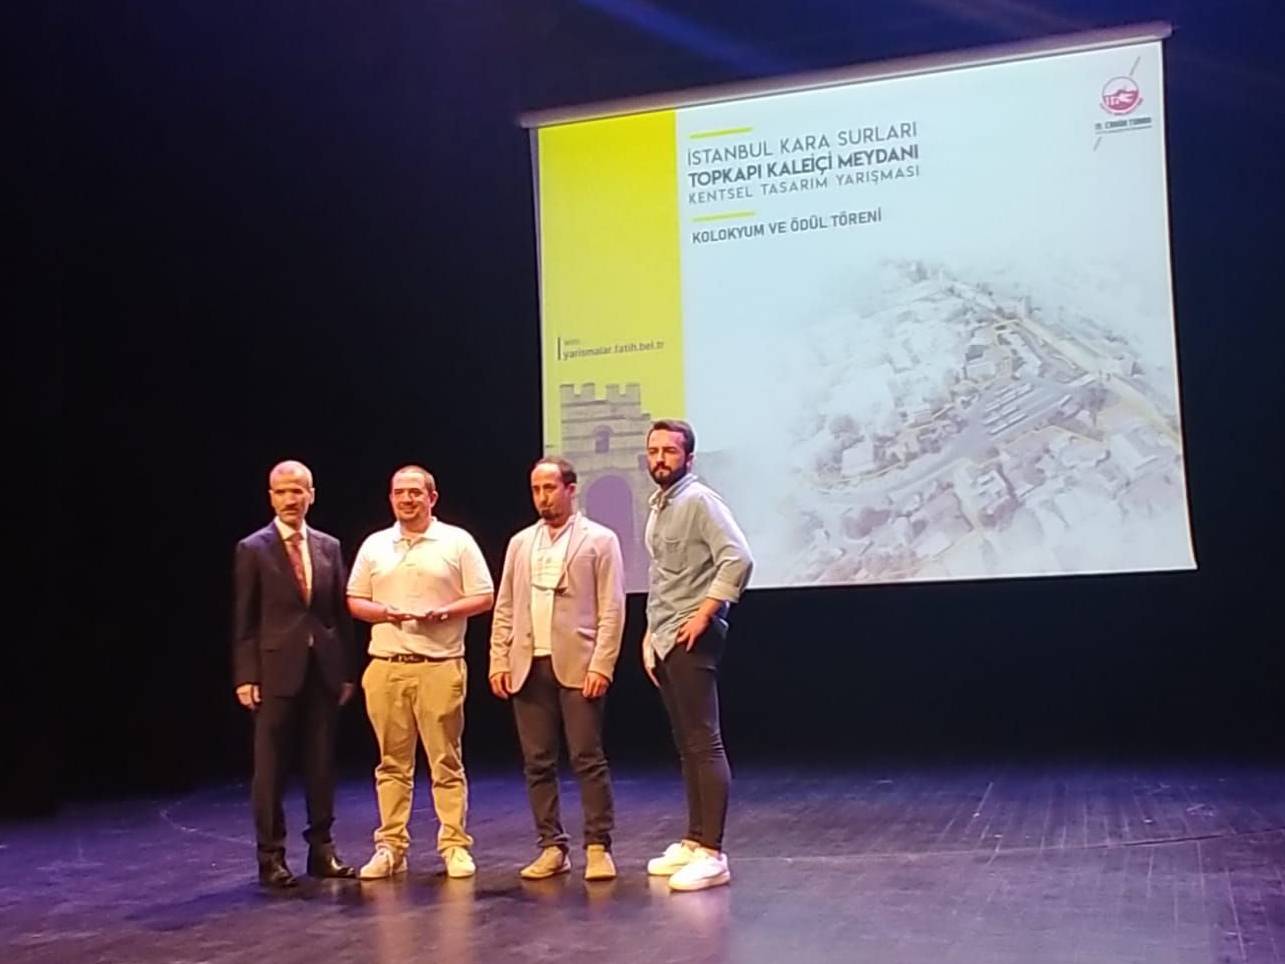 LAUD Team wins Honorable Mention Prize at the Topkapı Square Urban Design Competition!